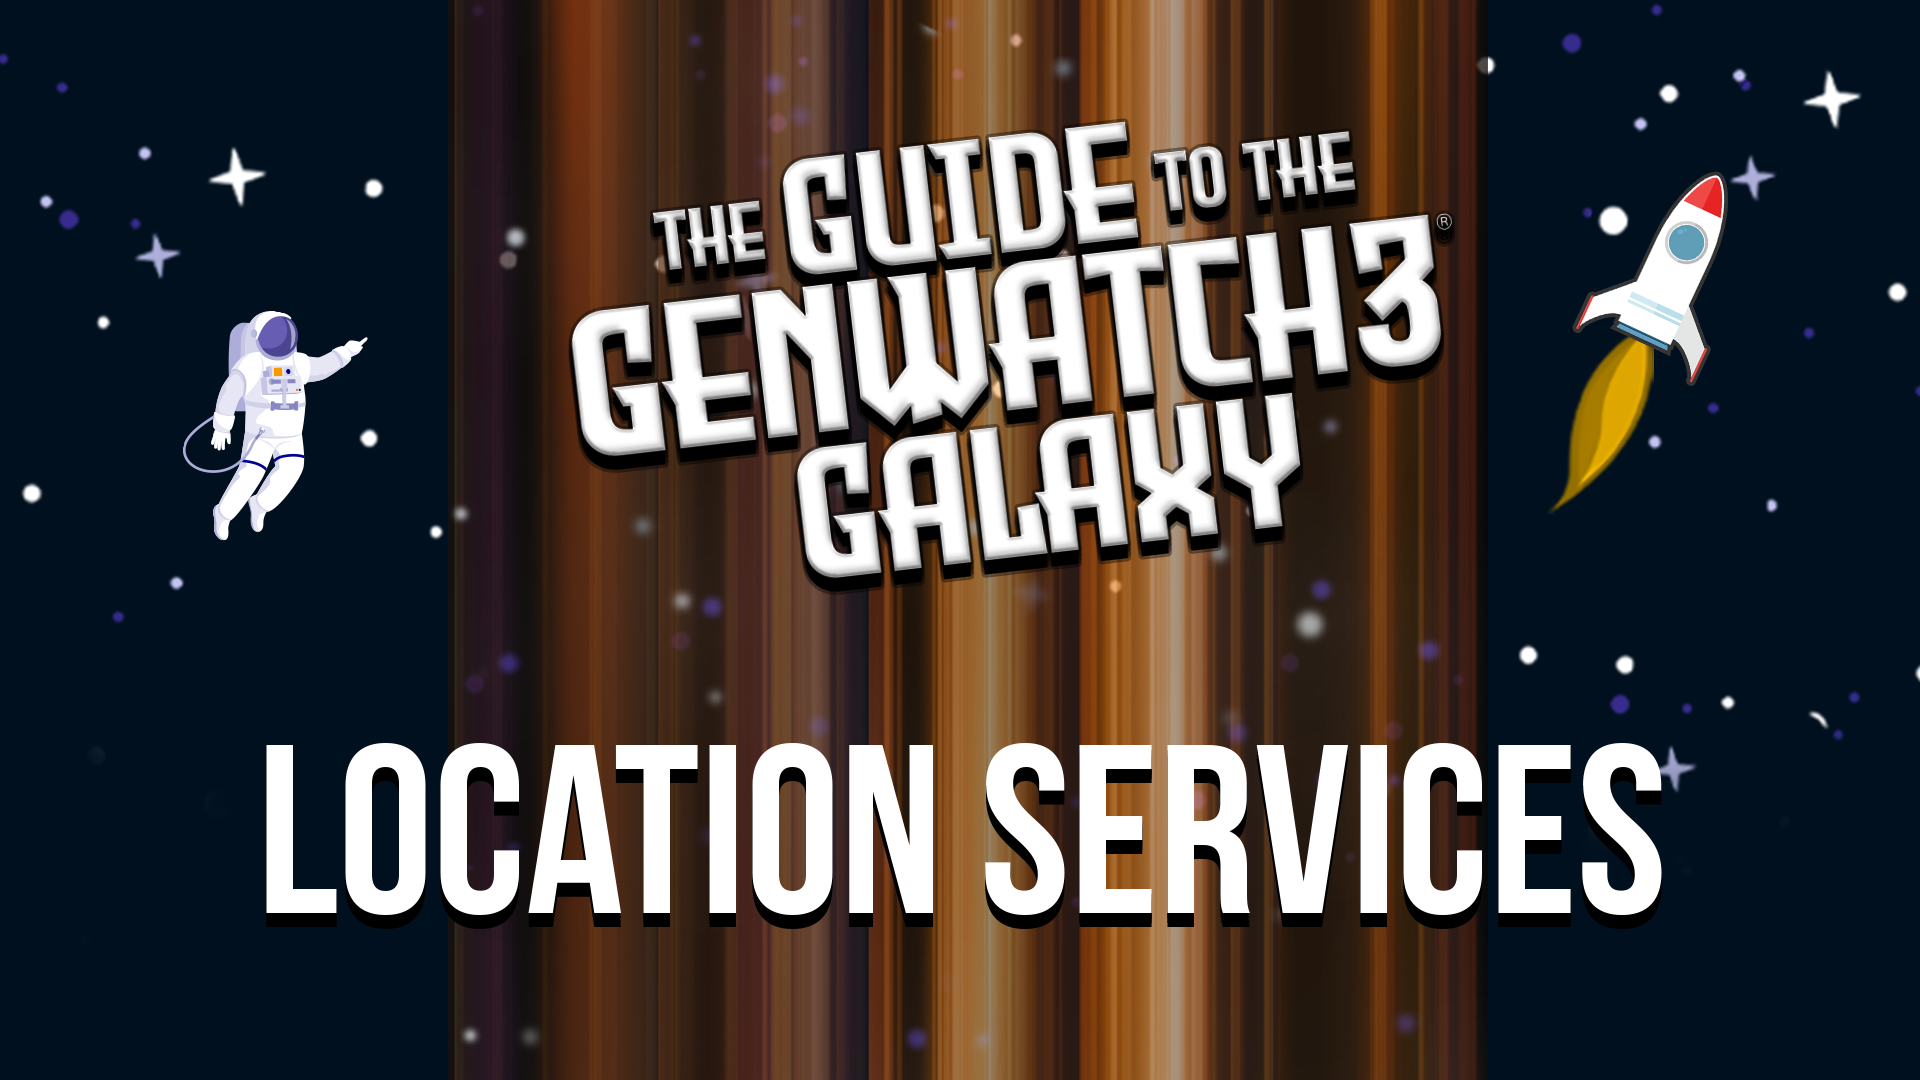 Guide to the GenWatch3 Galaxy - Location Services